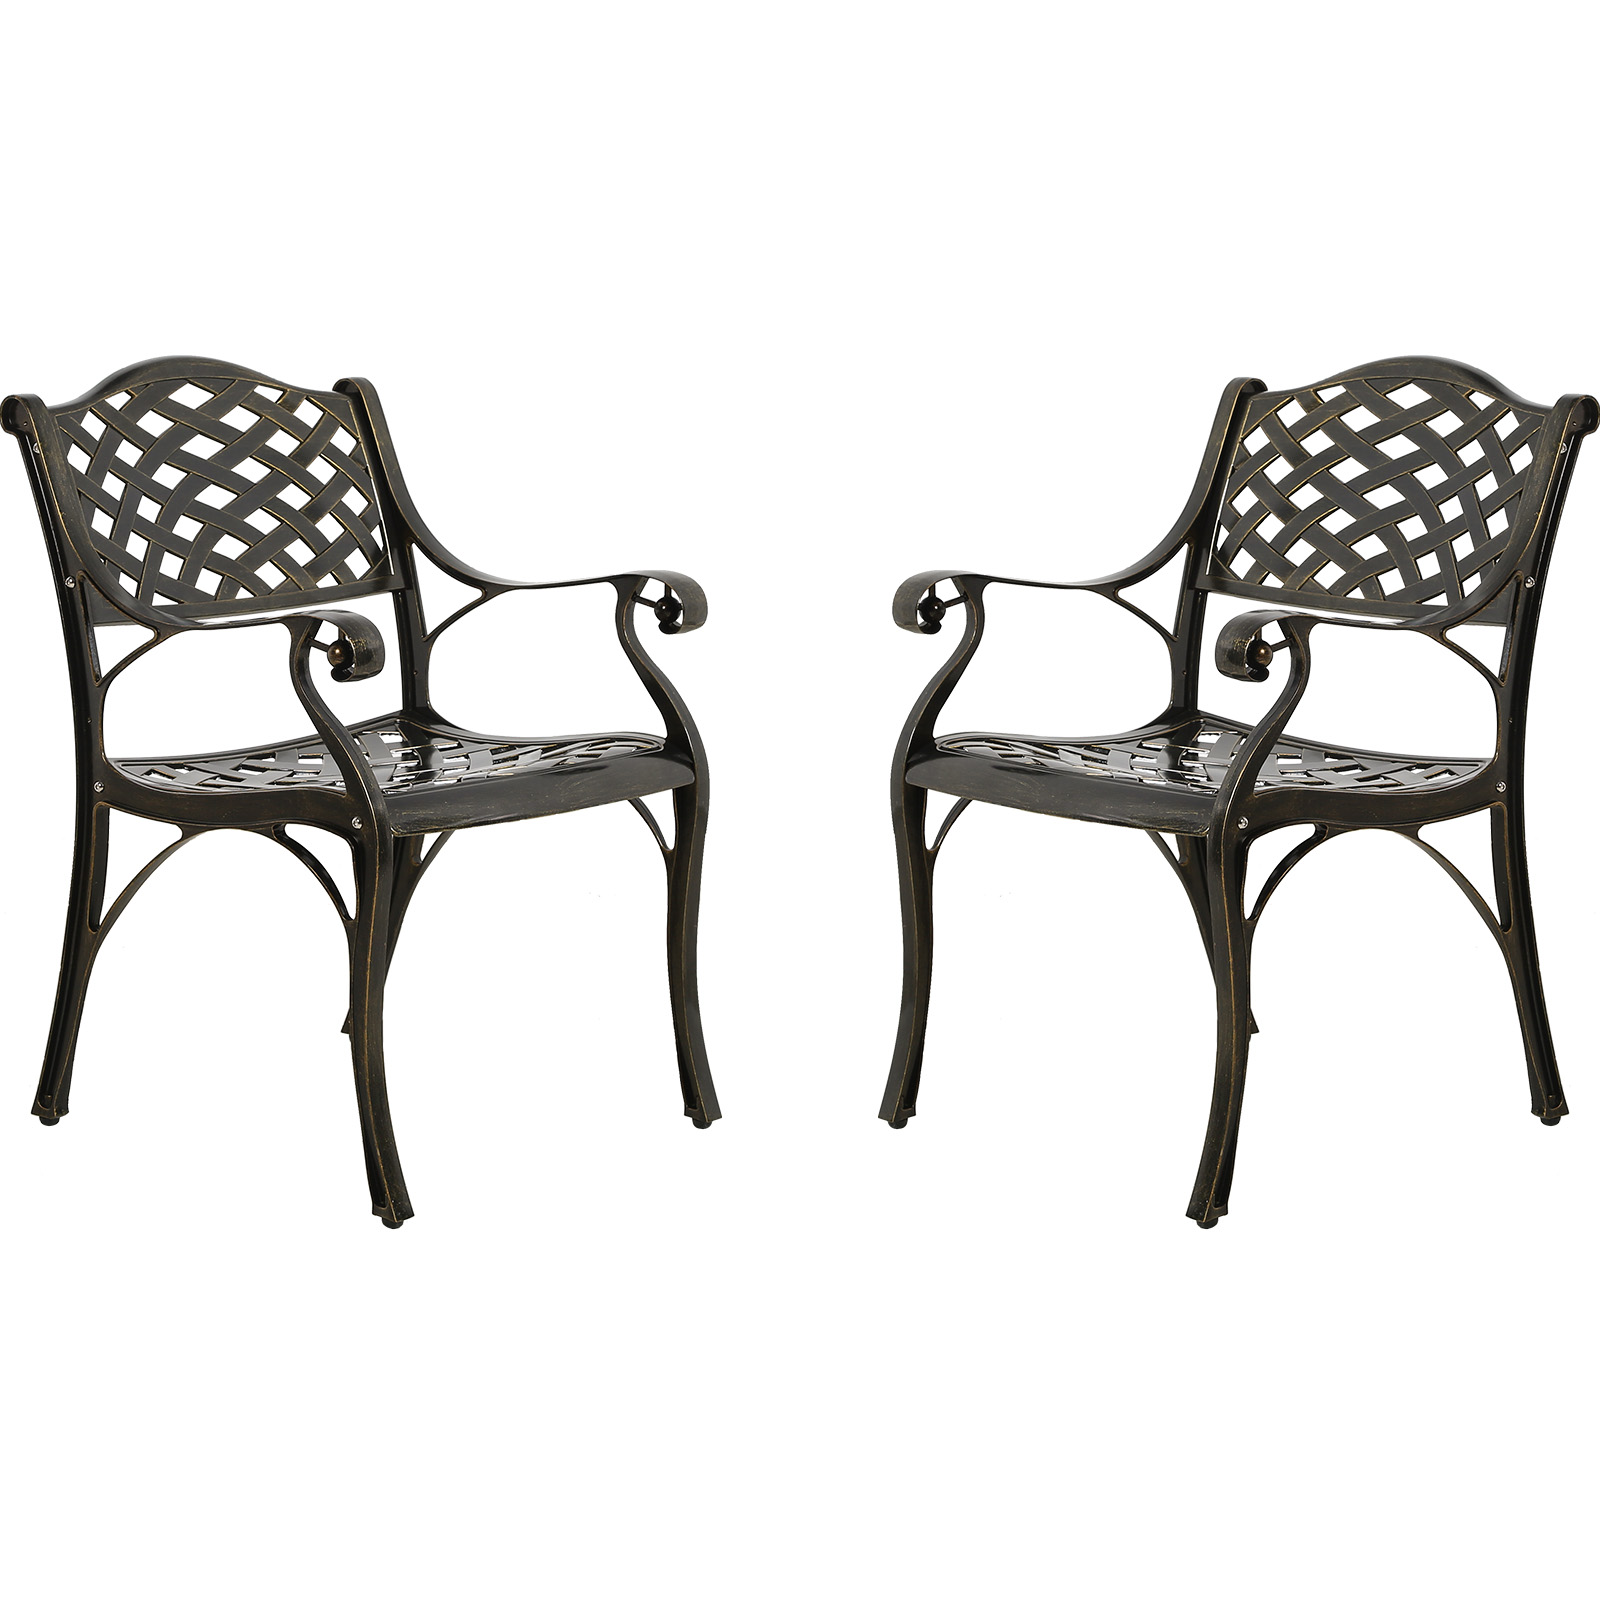 MEETWARM 2 Piece Patio Dining Chairs, Outdoor All-Weather Cast Aluminum Chairs, Patio Bistro Dining Chair Set of 2 for Garden Deck Backyard, Lattice Weave Design - image 1 of 7